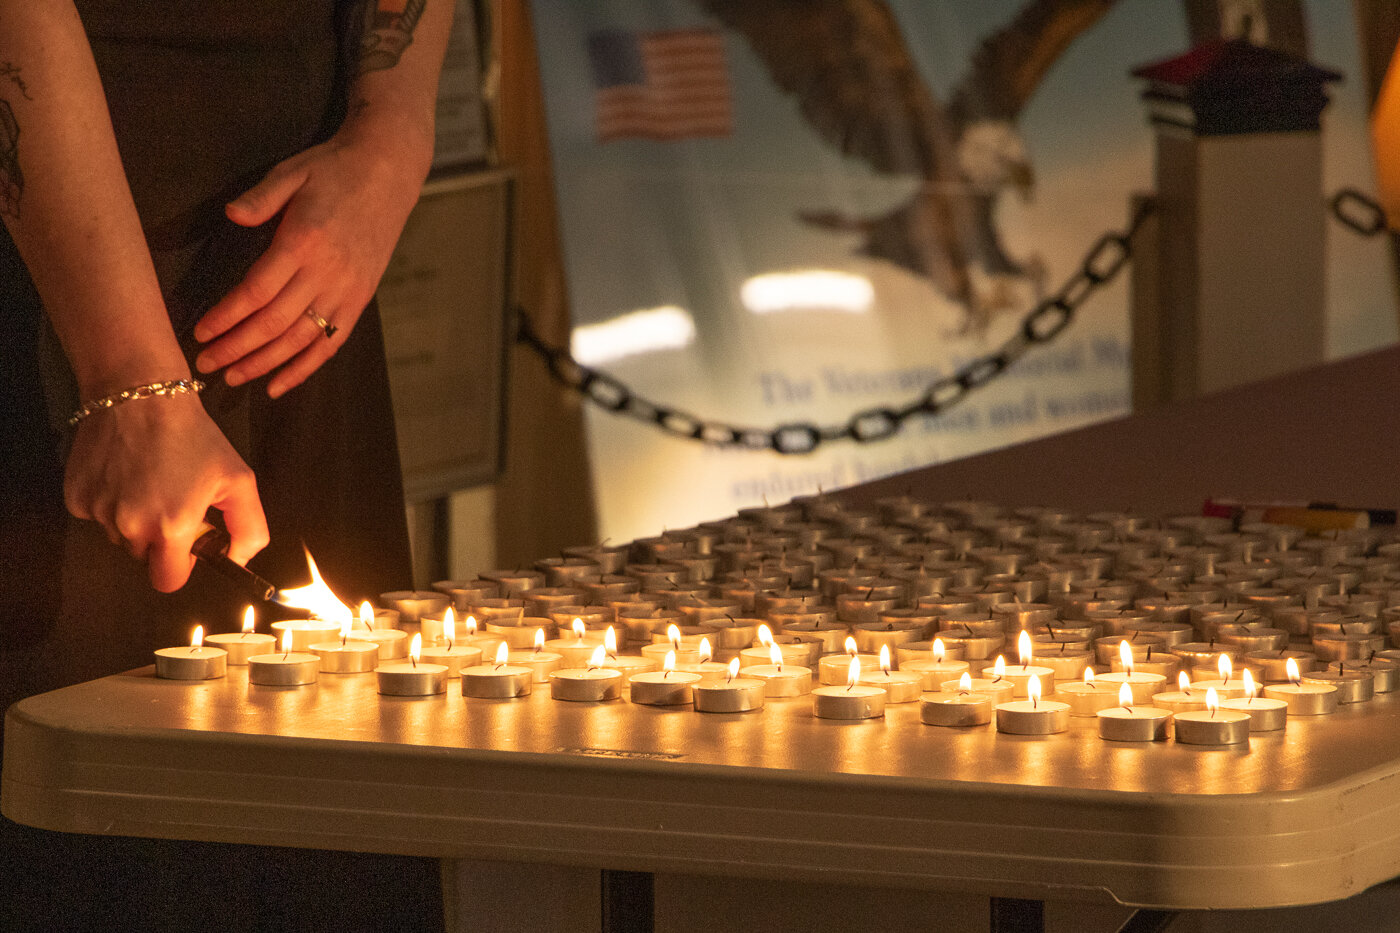 Kylie McKune-Dahl lights a candle in rememberance of each service member whose name hangs on dog tags on the branches of the Tree of Life at the Veterans Memorial Museum during a ceremony on Memorial Day.